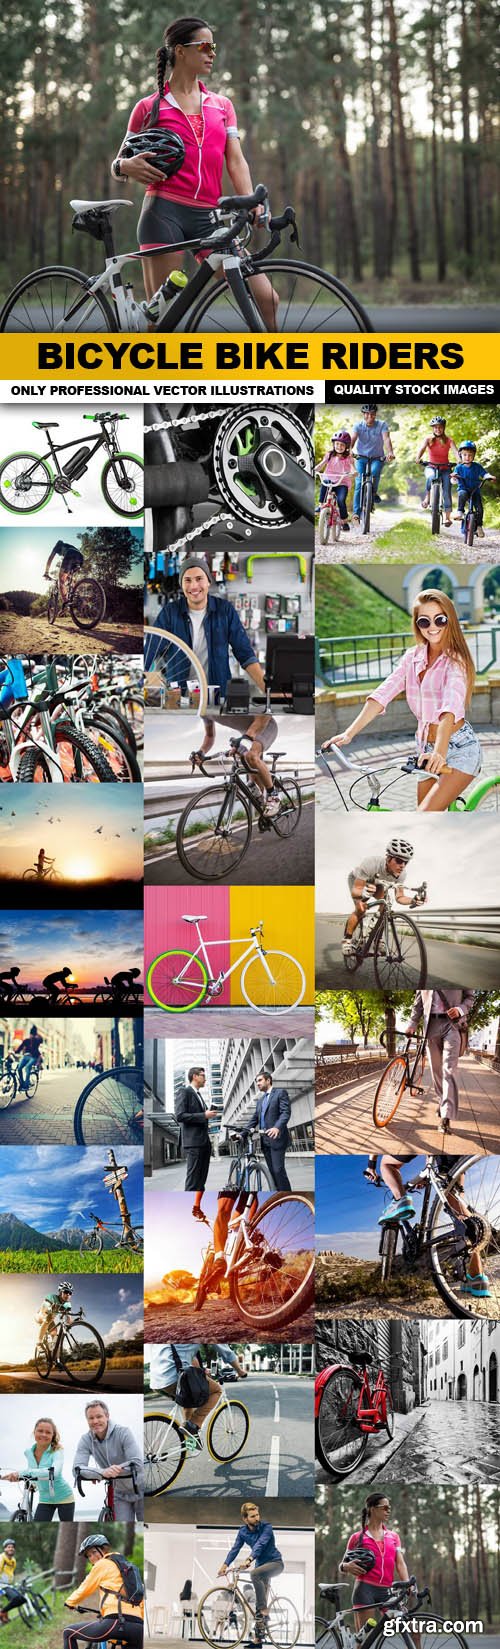 Bicycle Bike Riders - 25 HQ Images